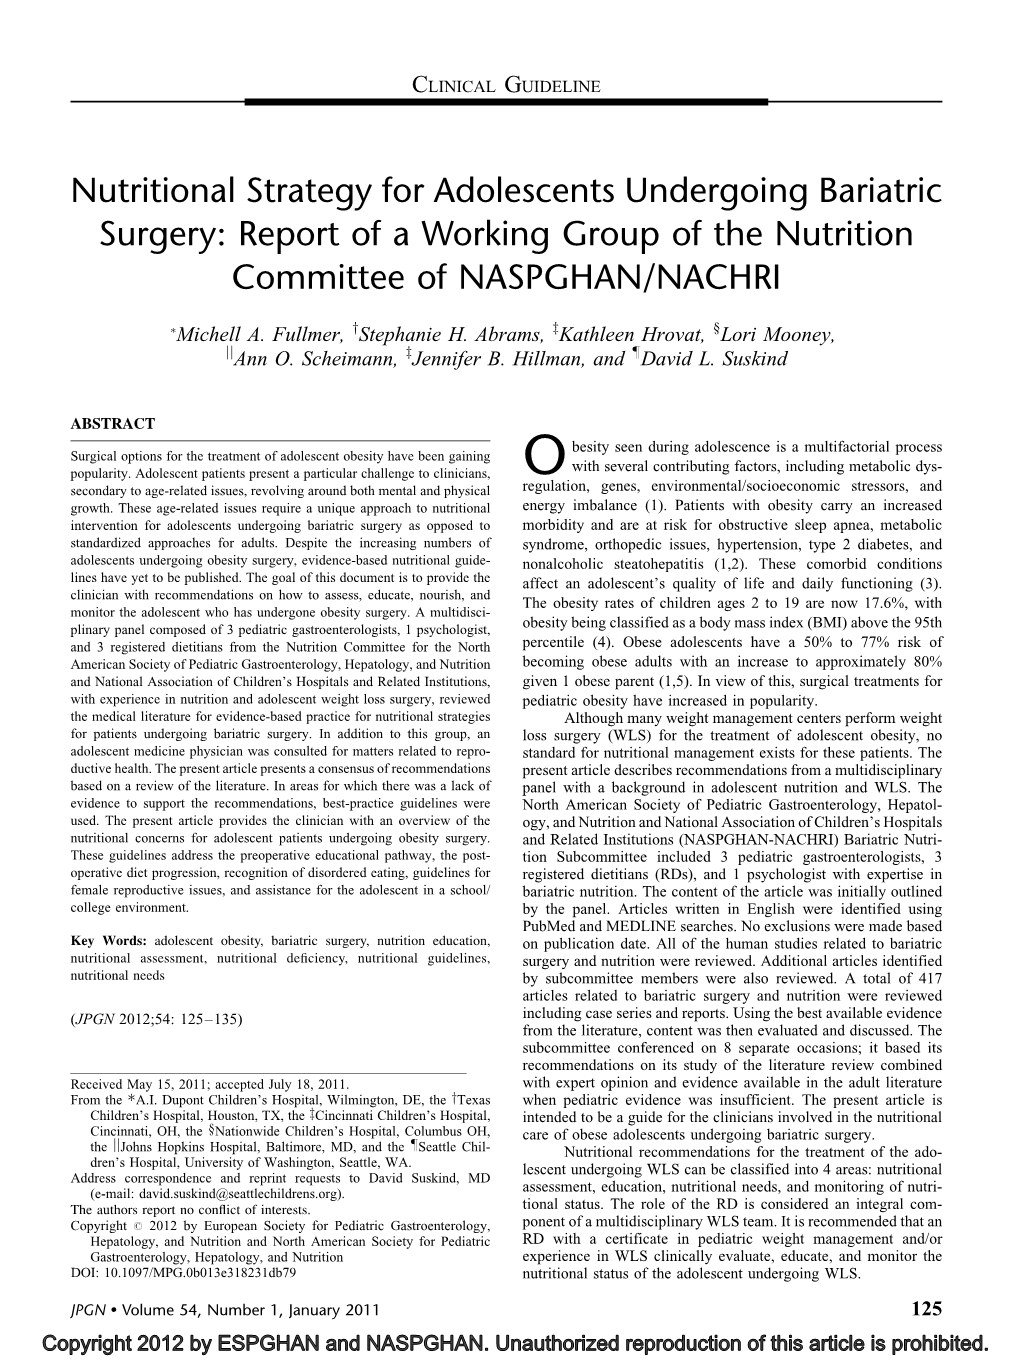 Nutritional Strategy for Adolescents Undergoing Bariatric Surgery: Report of a Working Group of the Nutrition Committee of NASPGHAN/NACHRI